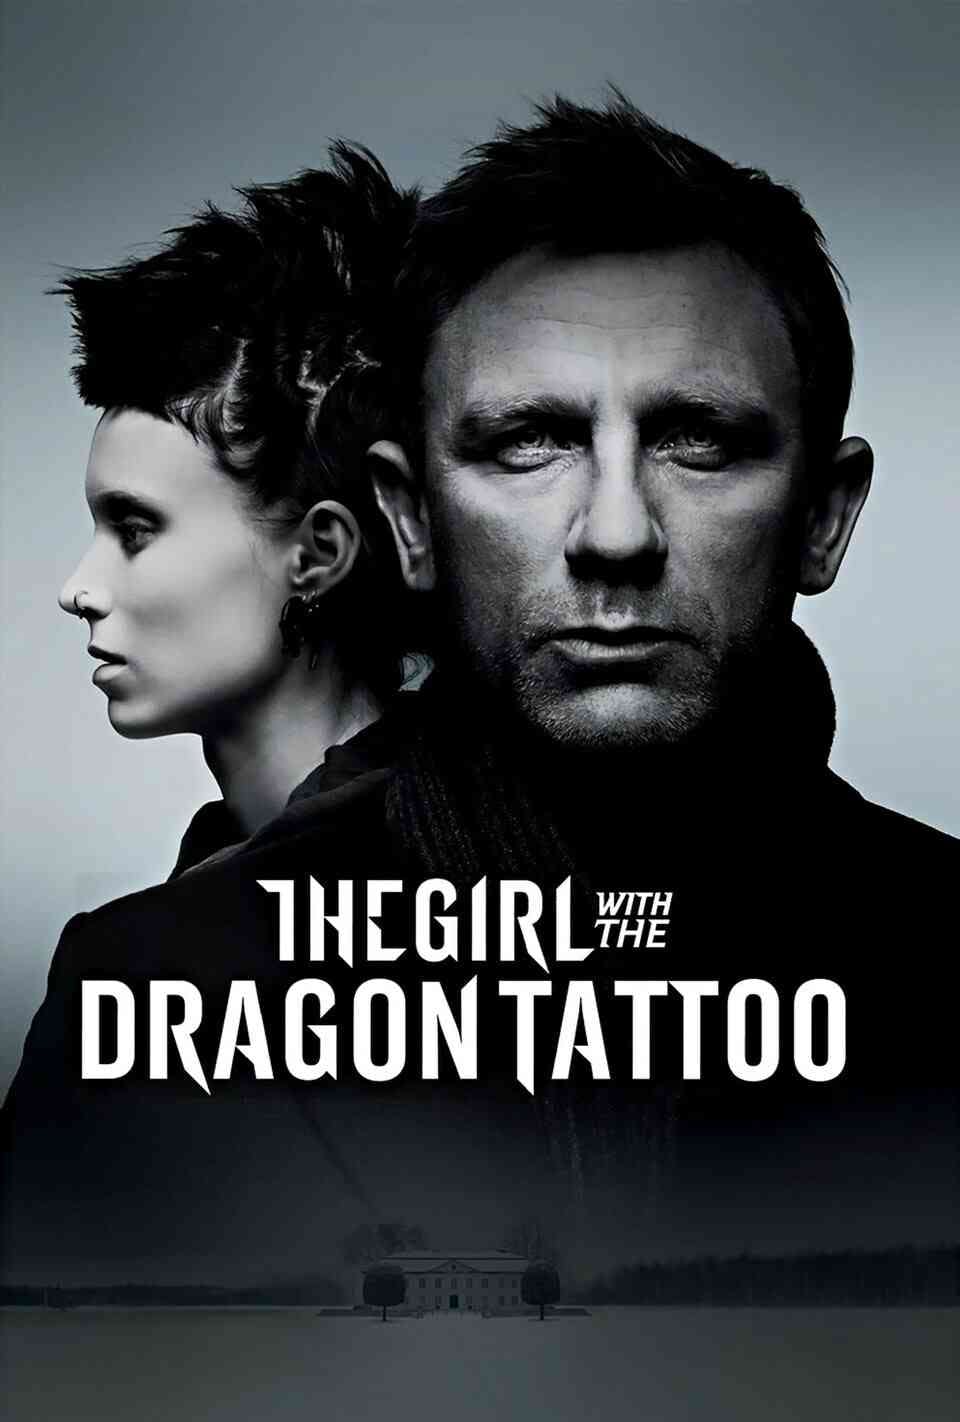 Read The Girl with the Dragon Tattoo screenplay.